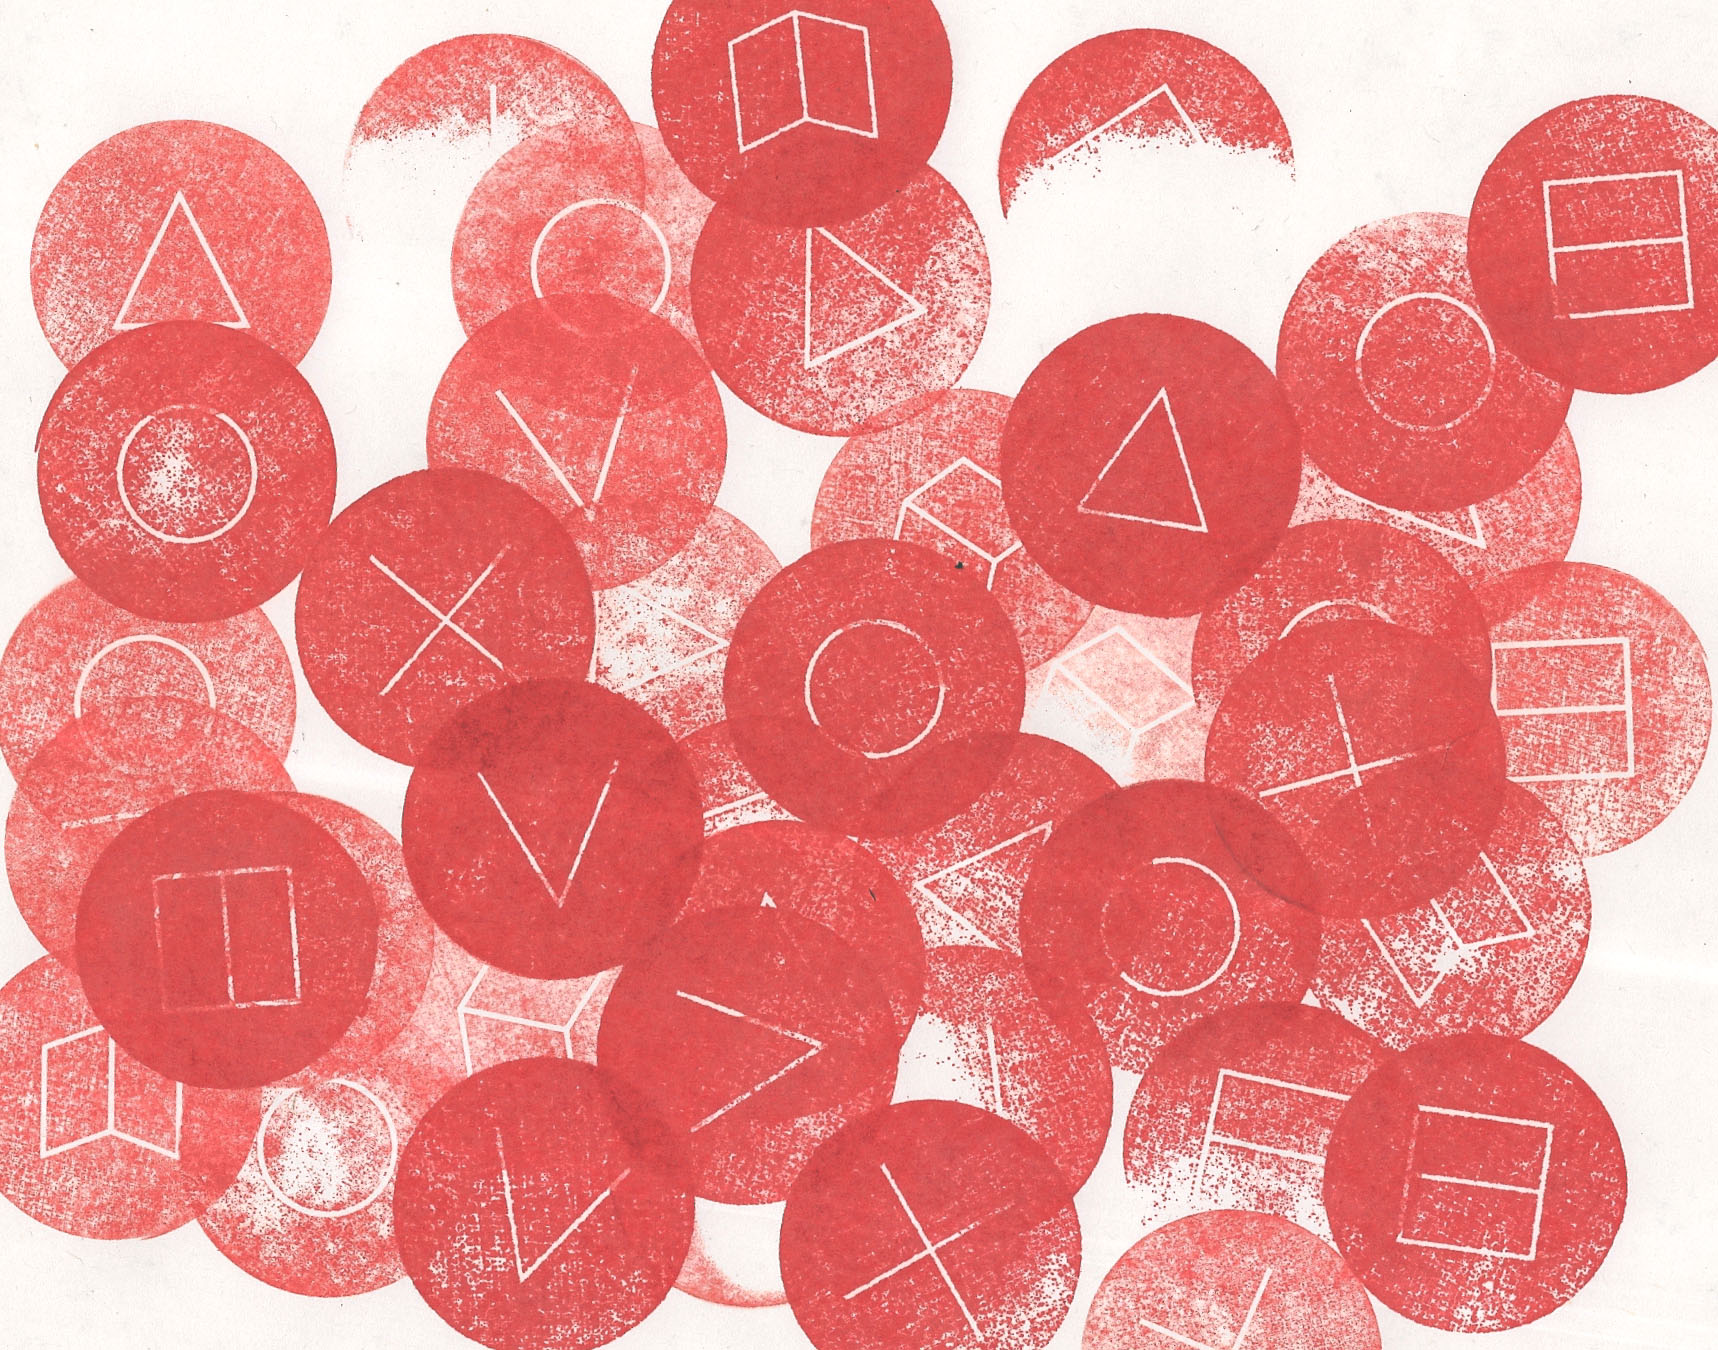 Soft red ink stamps of overlapping circles with geometric shapes inside